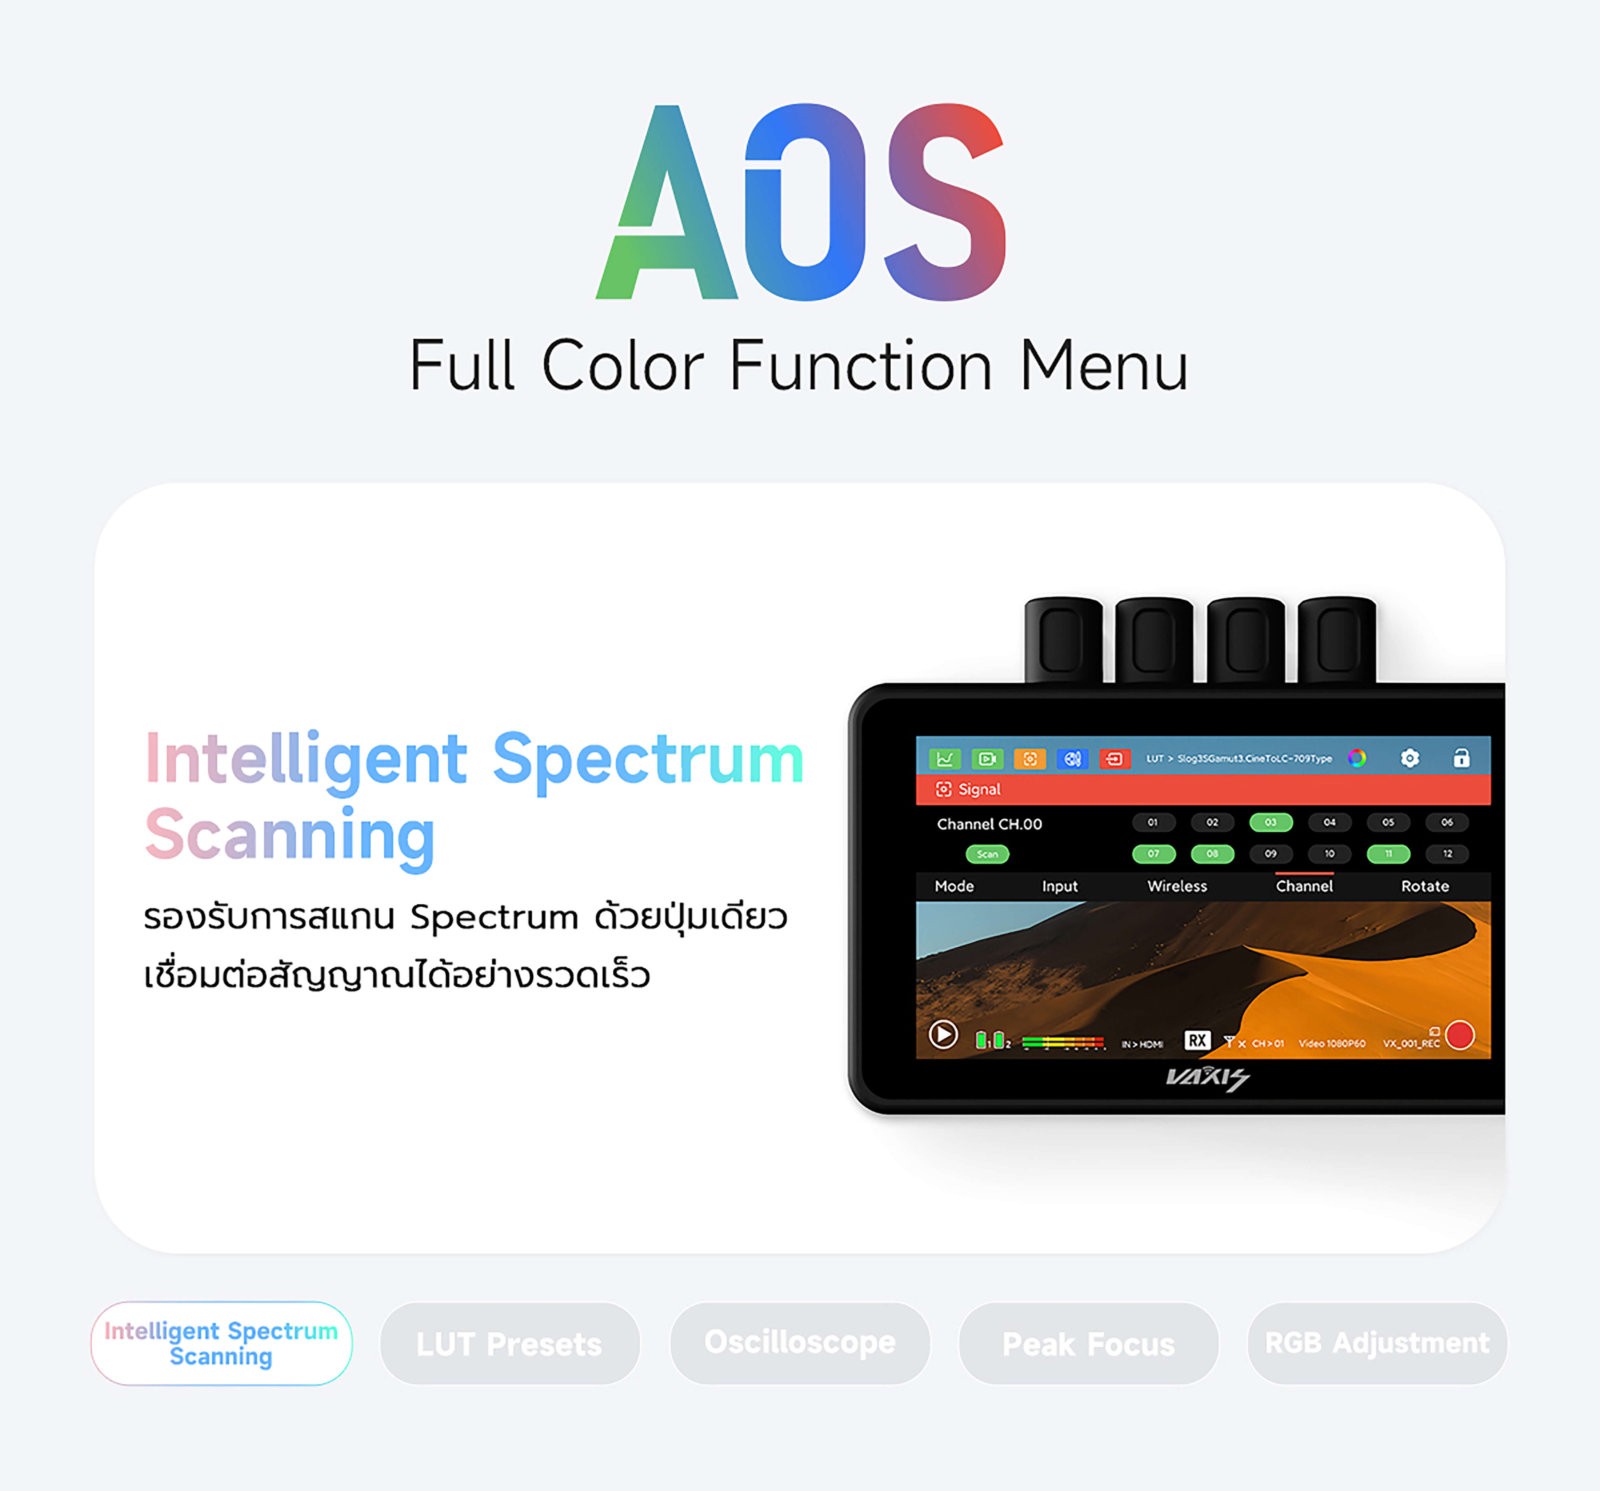 A5 Full color function 1